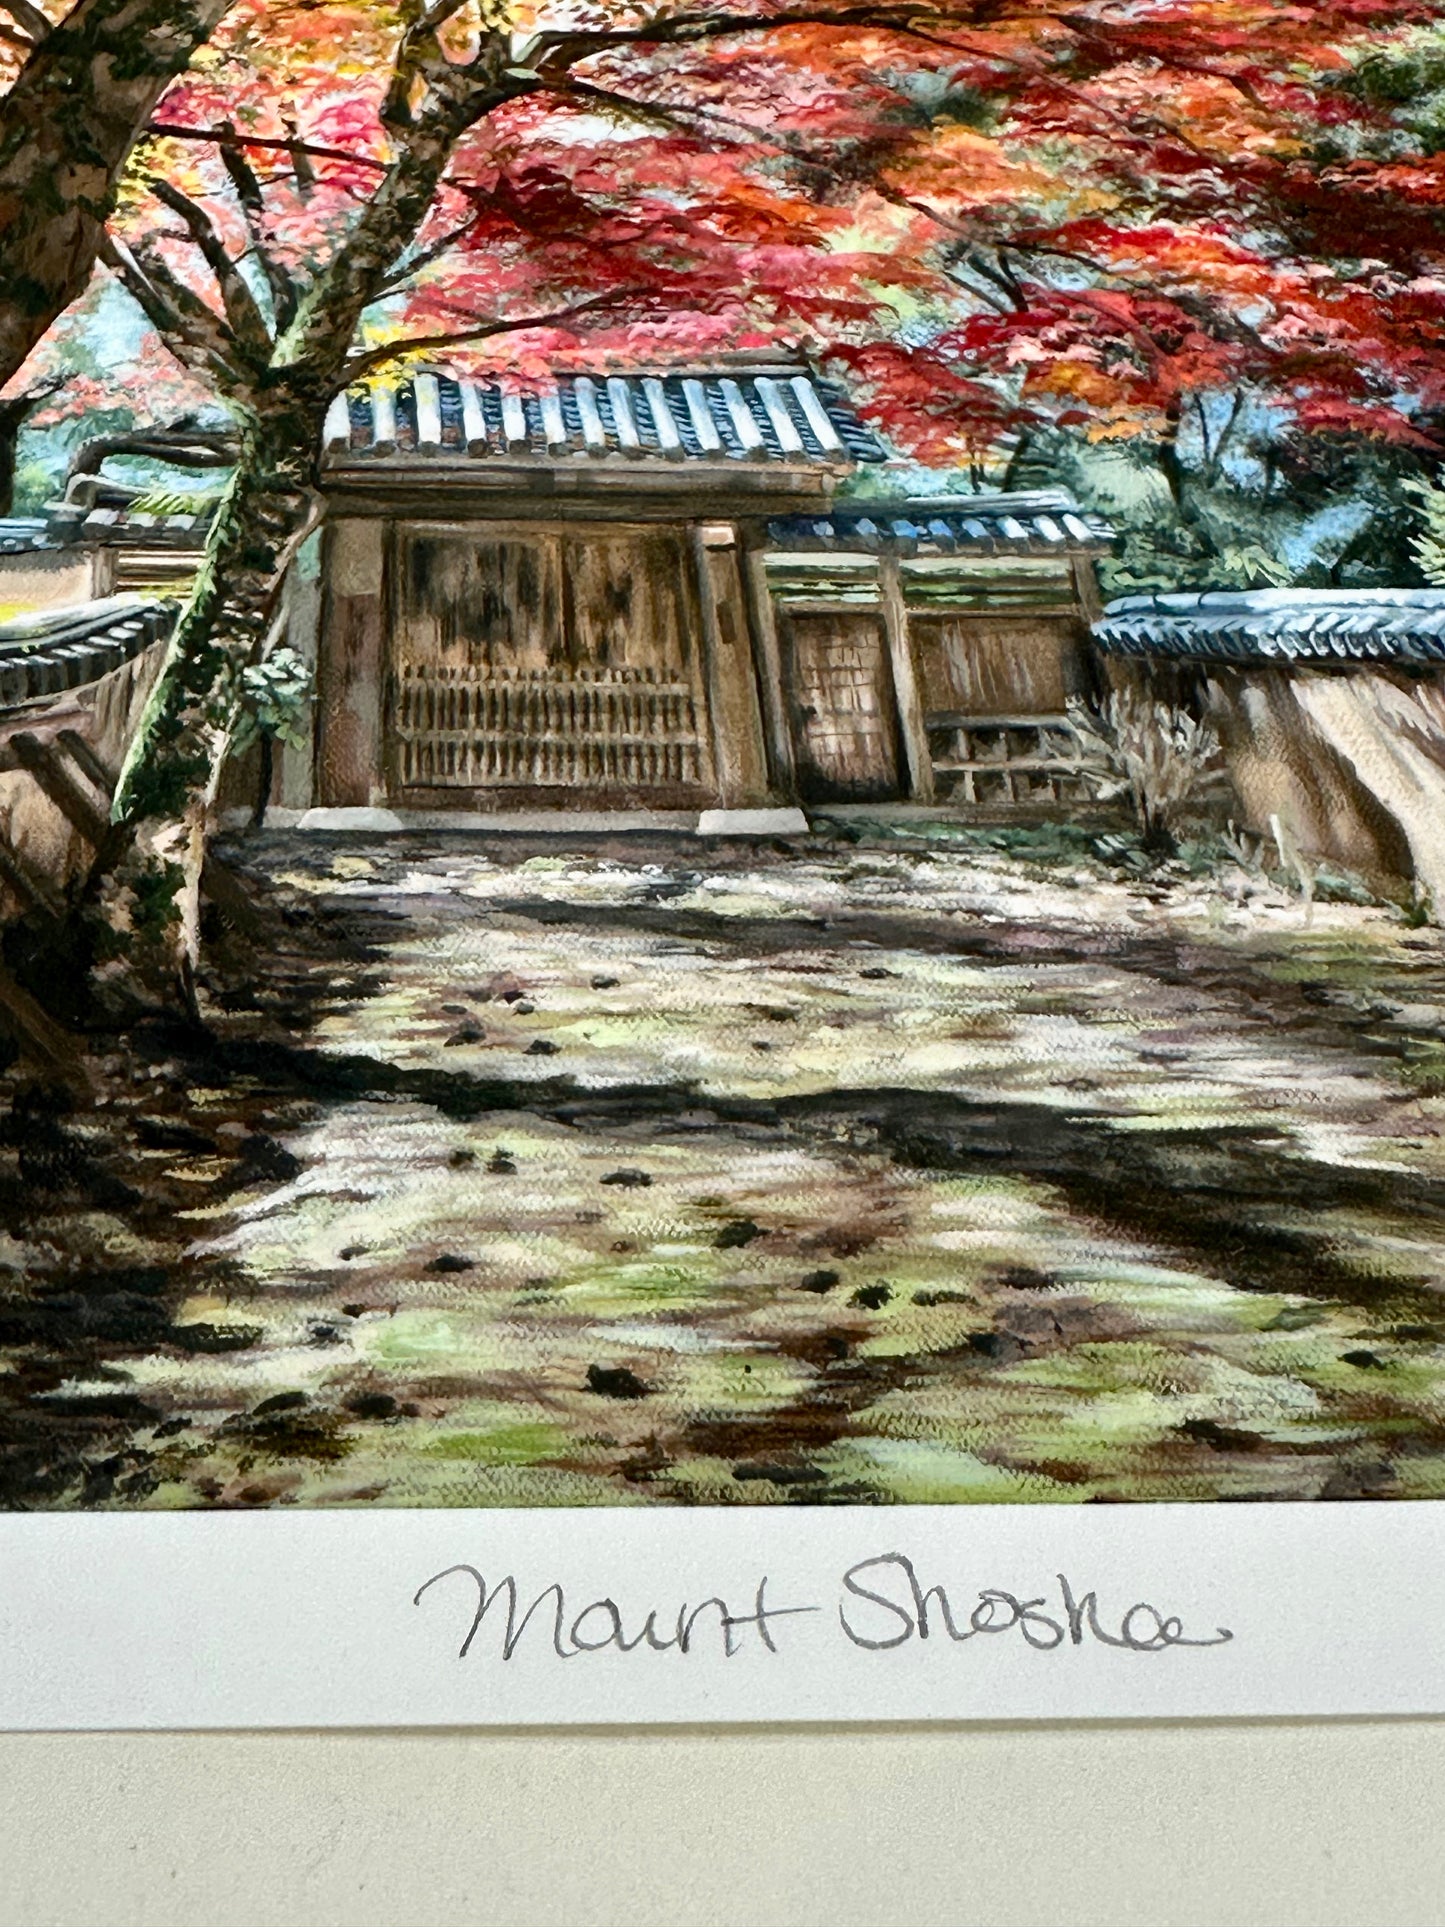 "Mt Shosha" by Laura Virgin Signed Giclée Print 9"x11" Limited Edition